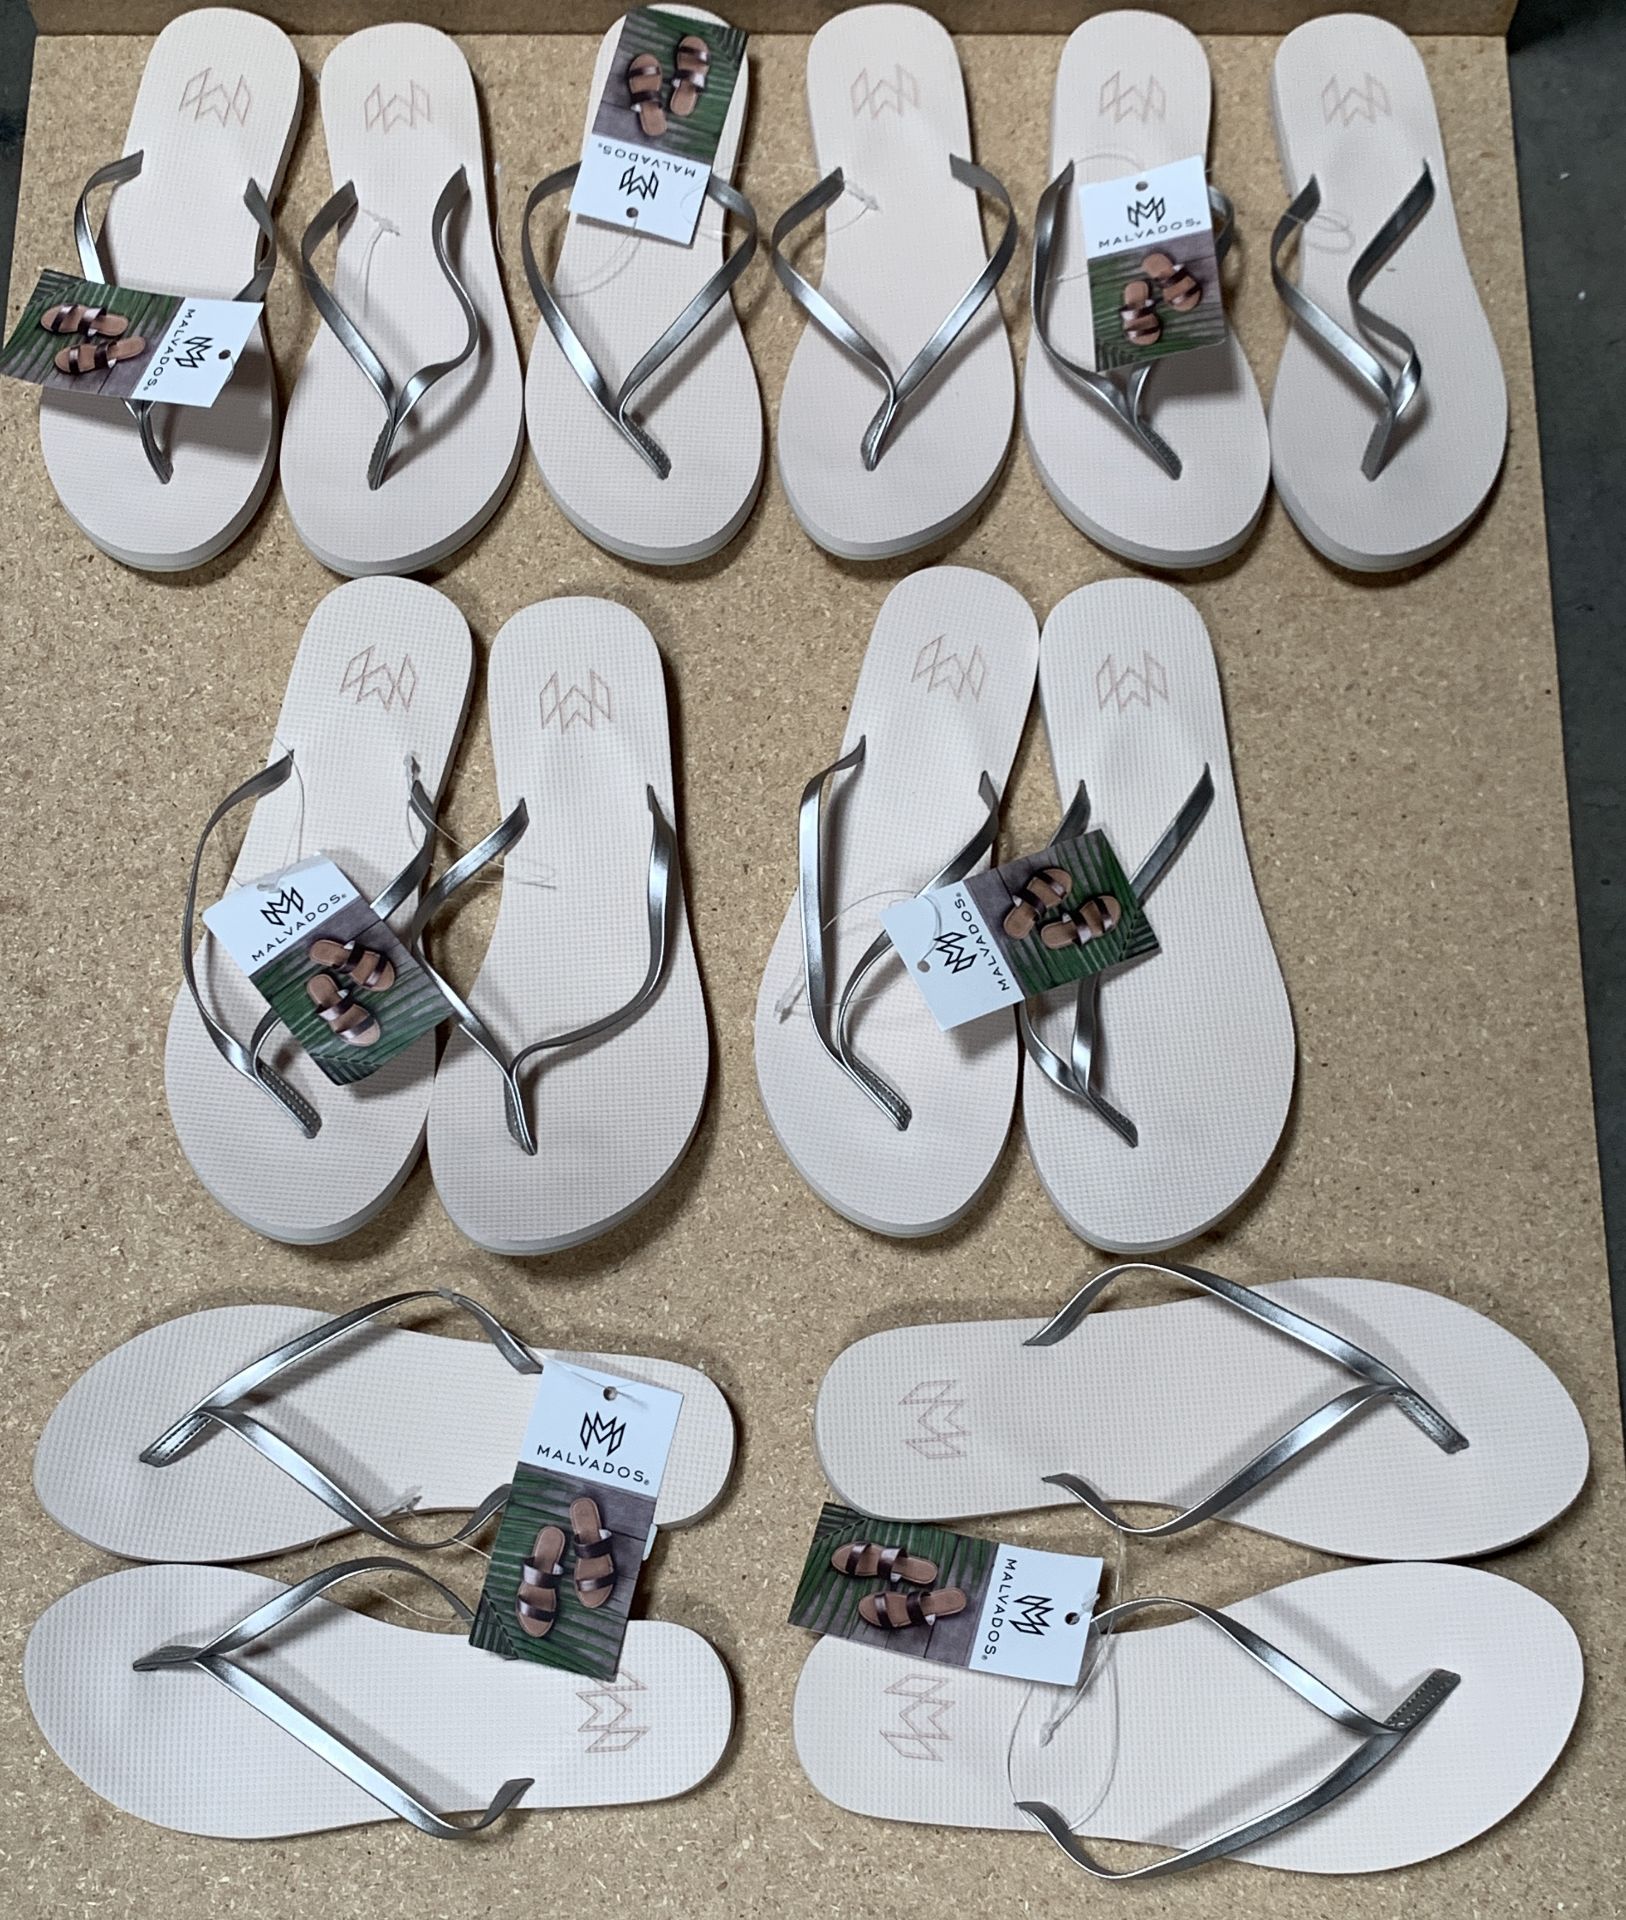 7 Pairs Malvados Flip Flop Sandals, New with Tags, Various Sizes, Lux Wicked (Retail Value $266) - Image 2 of 5